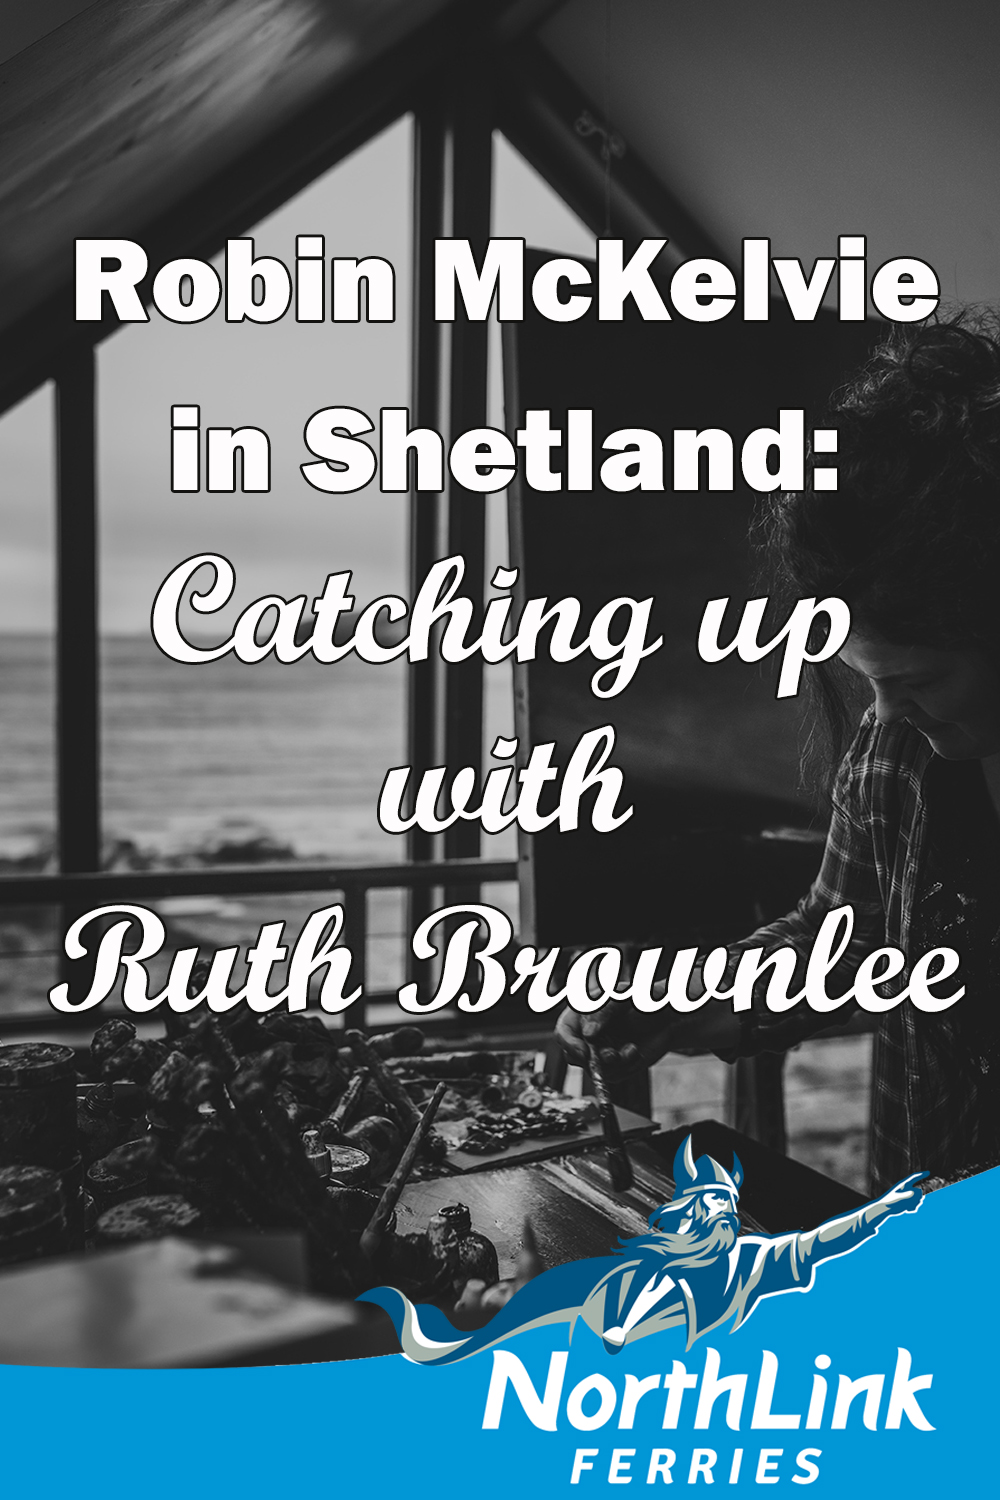 Robin McKelvie in Shetland: Catching up with Ruth Brownlee